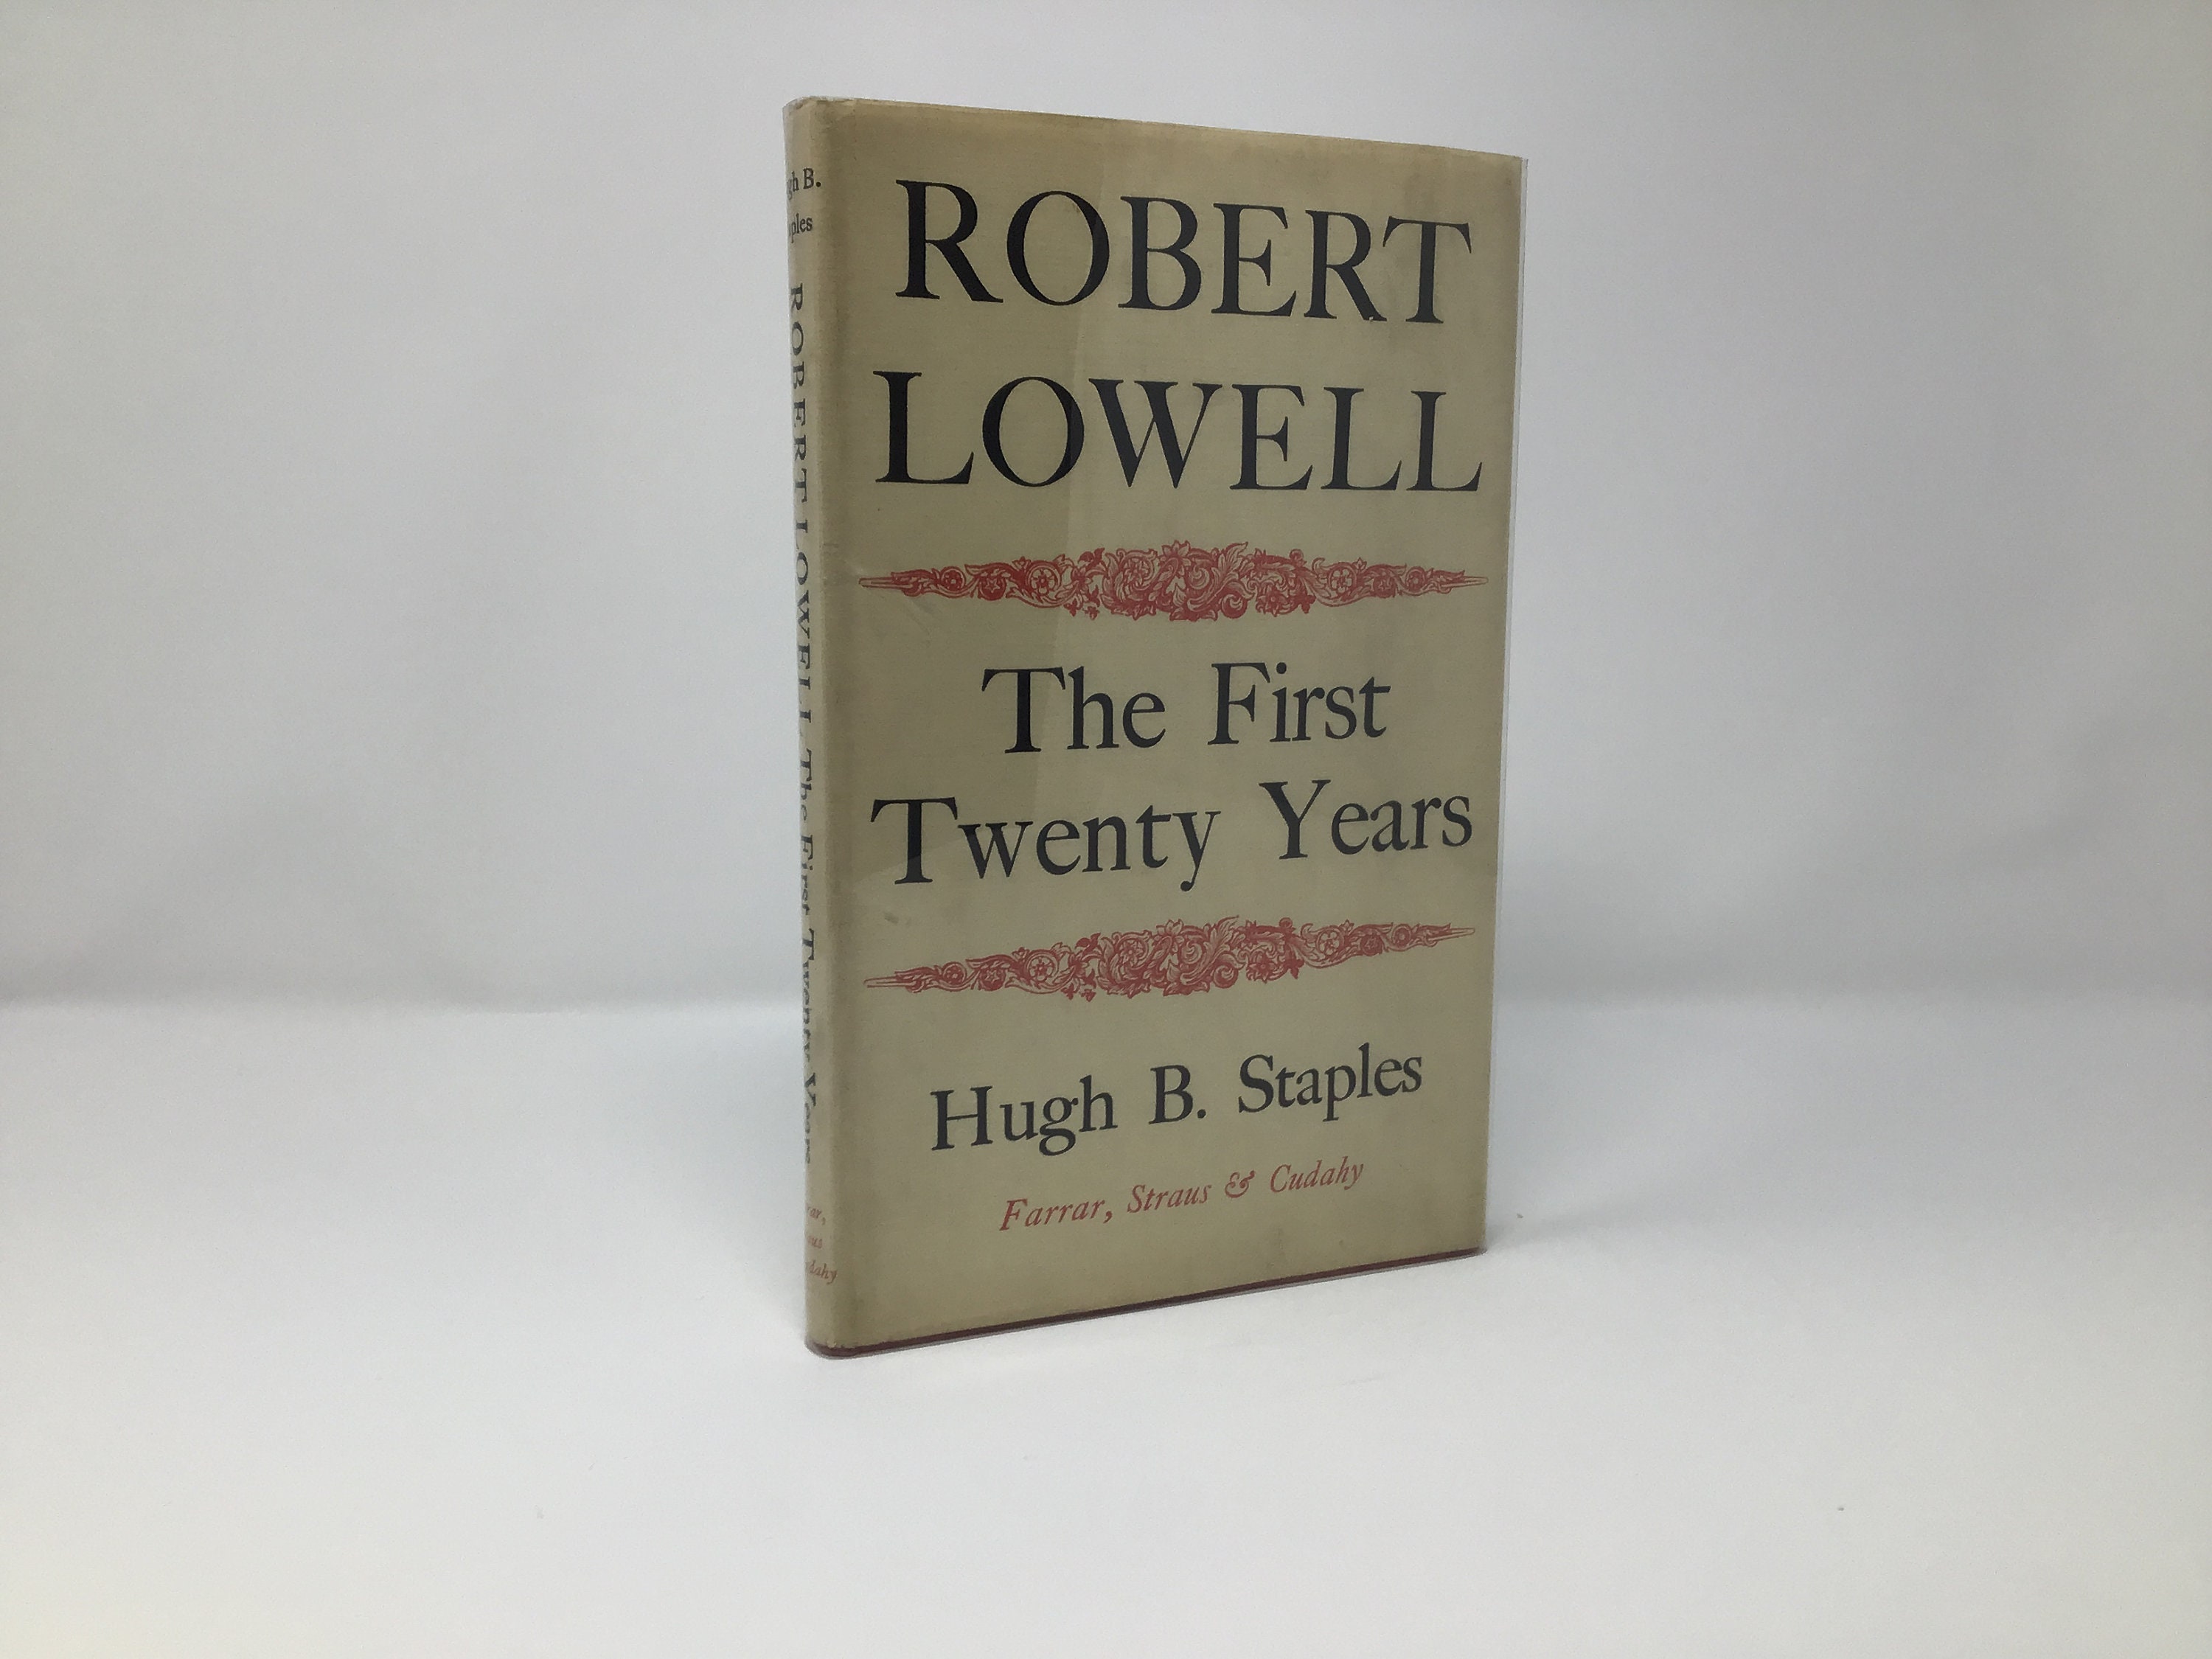 Life Studies and for the Union Dead by Robert Lowell (1967, Trade Paperback)